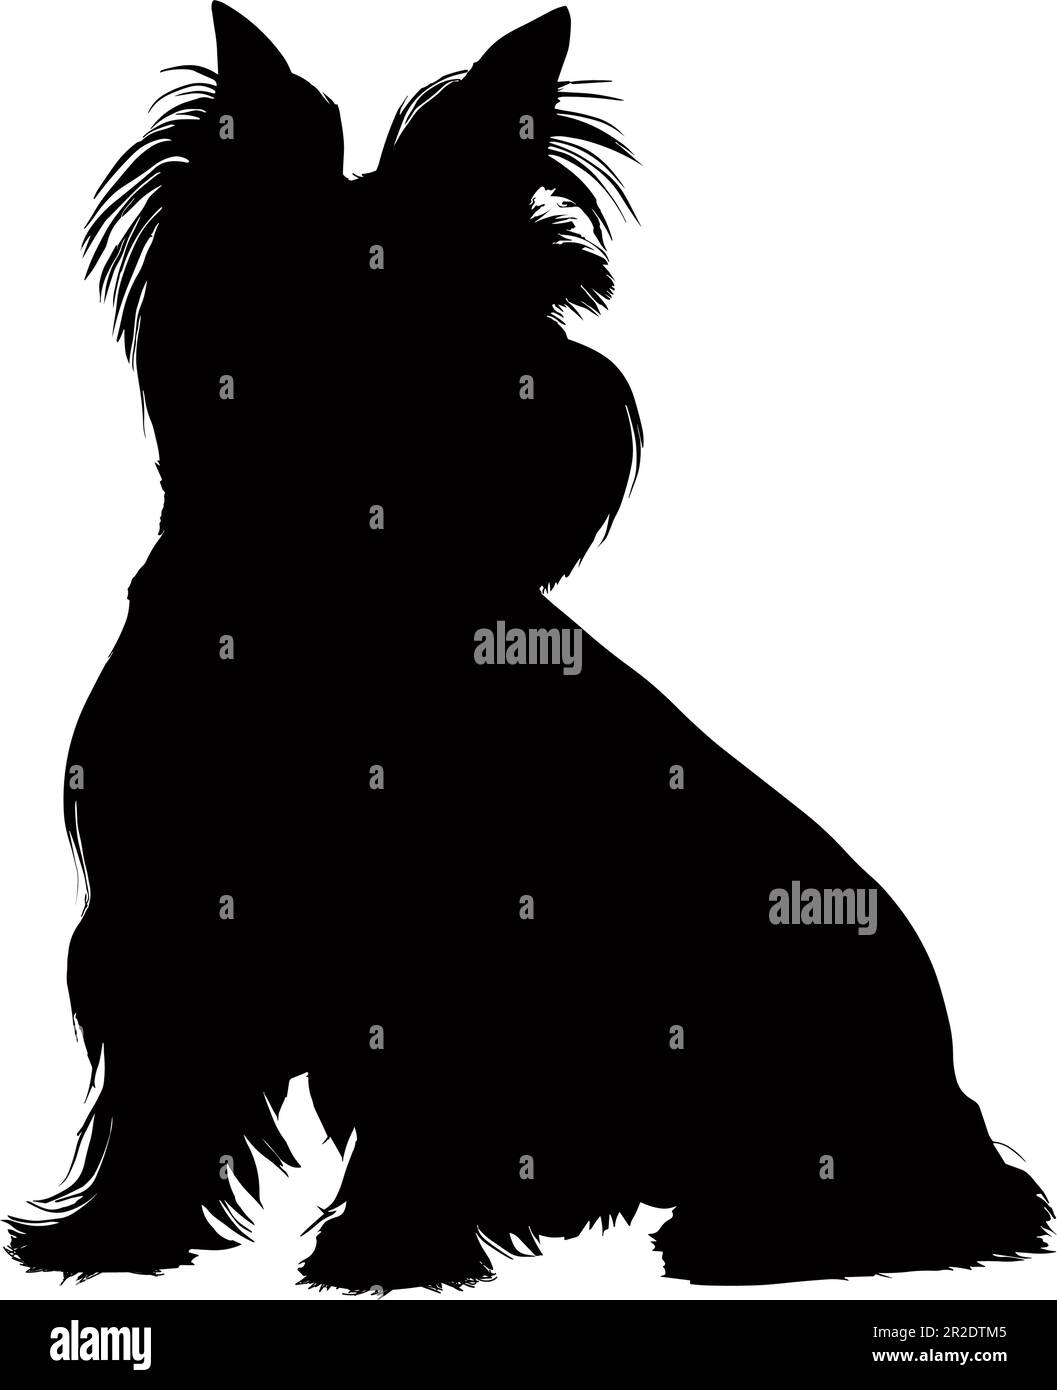 Sitting West highland Terrier dog silhouette isolated on a white background. Vector illustration Stock Vector